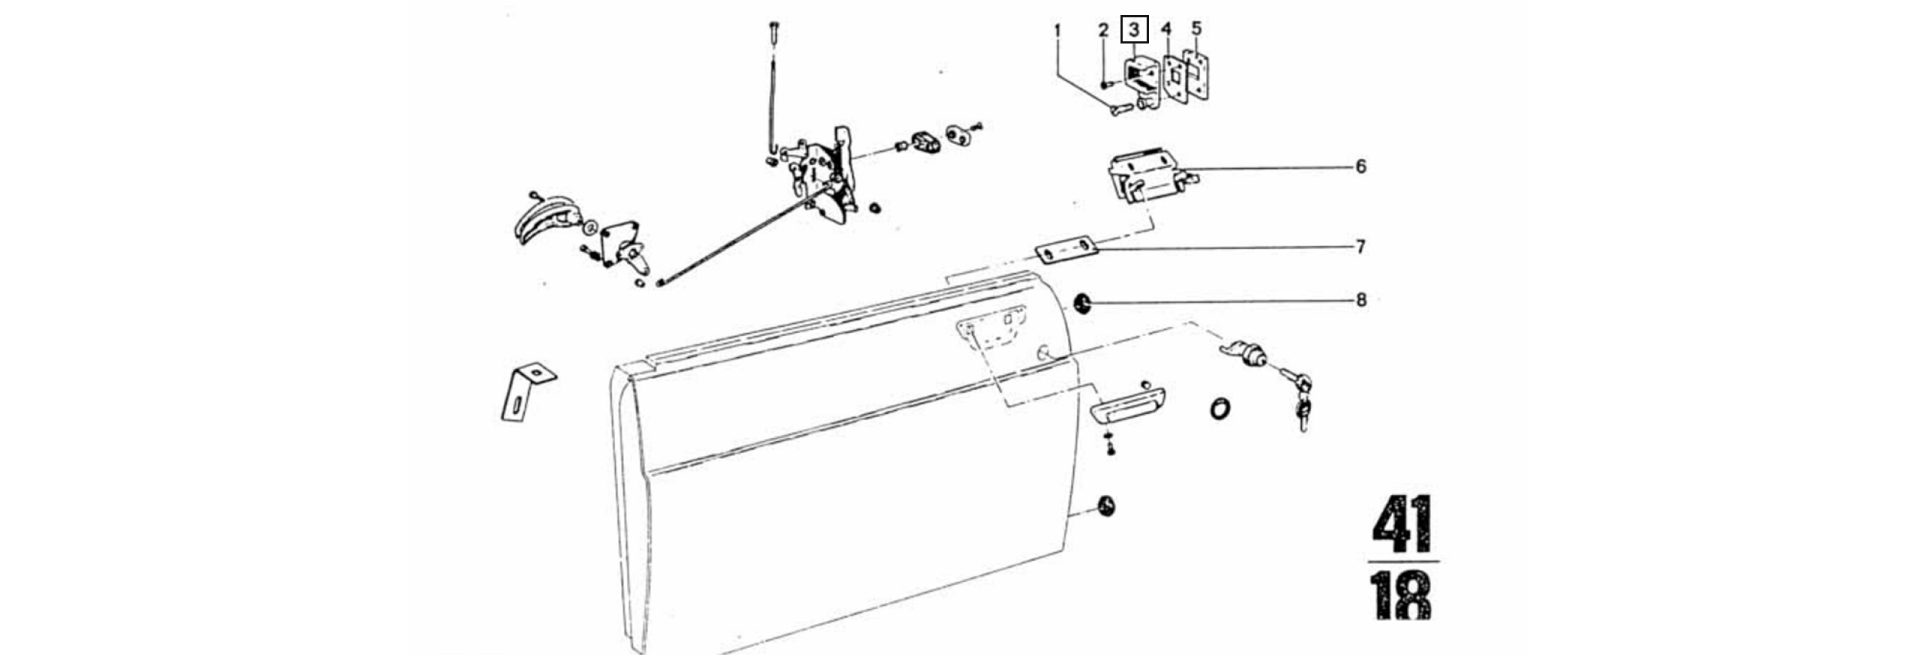 Latch striker exploded-view drawing